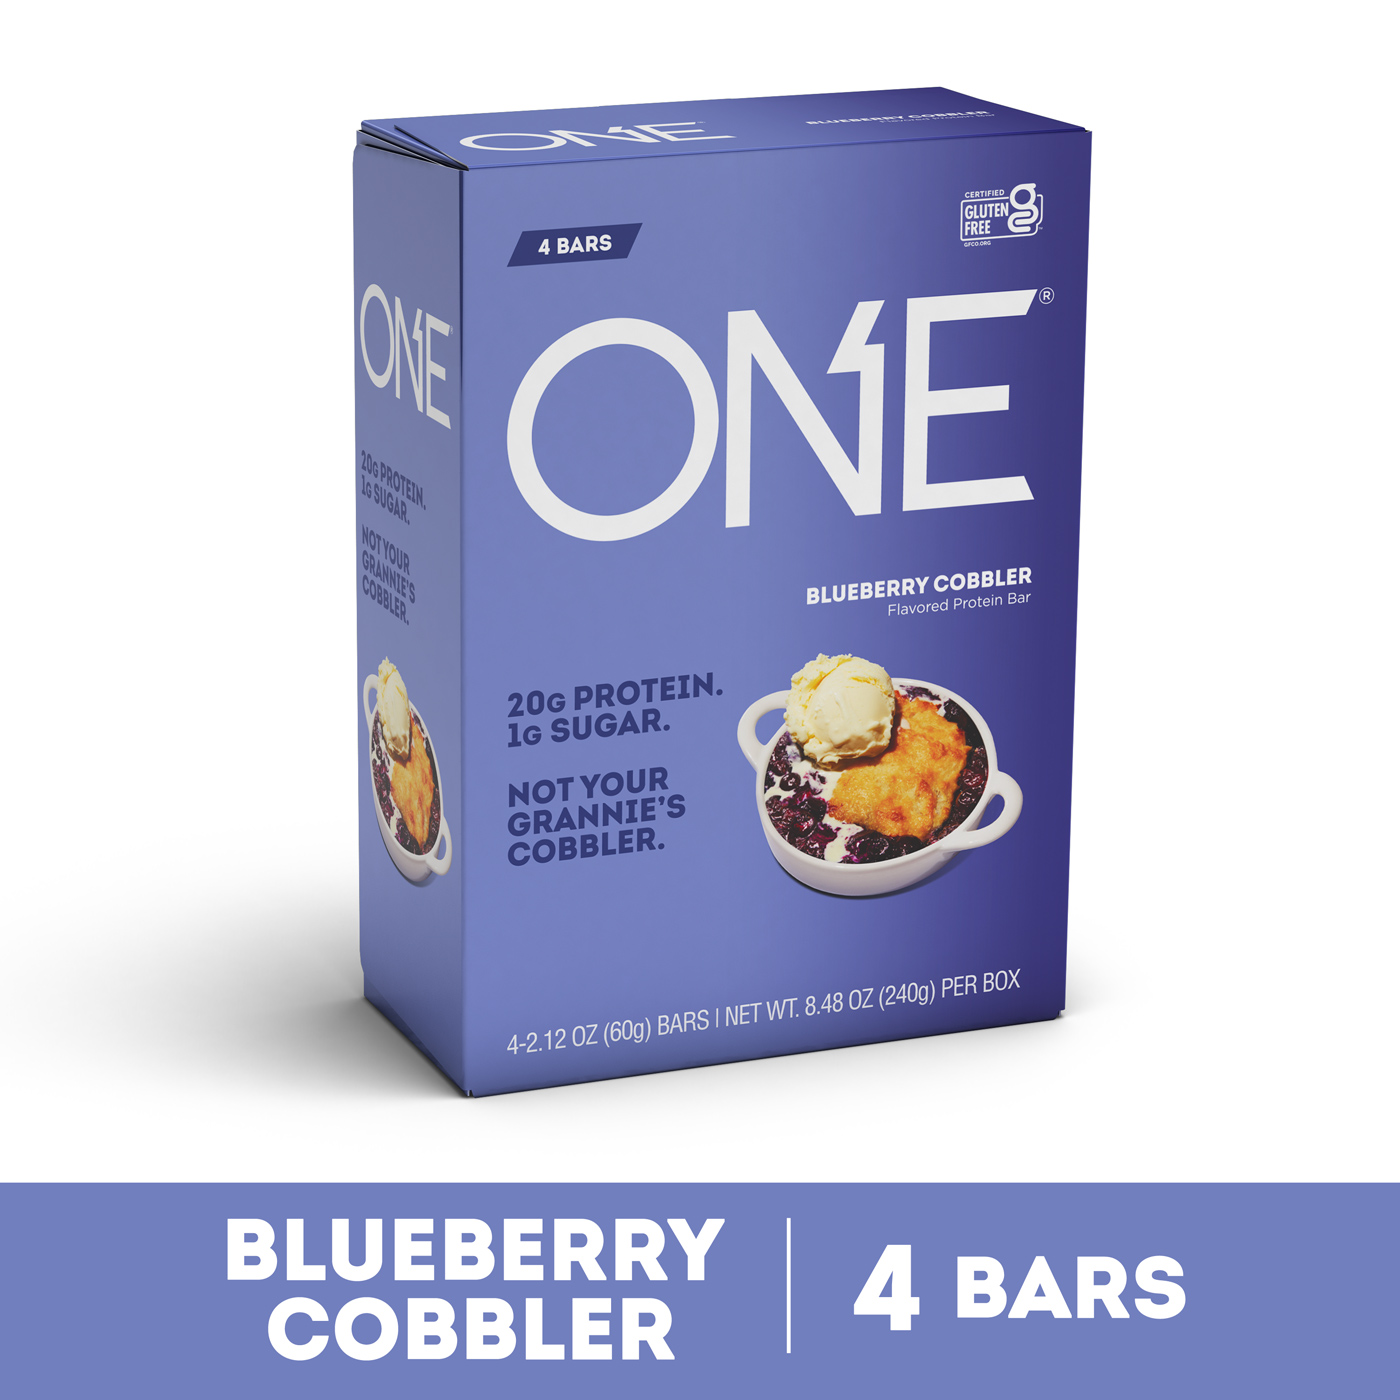 One Blueberry Cobbler Protein Bar, 20g Protein, 2.12 oz., 4 Count - image 1 of 7